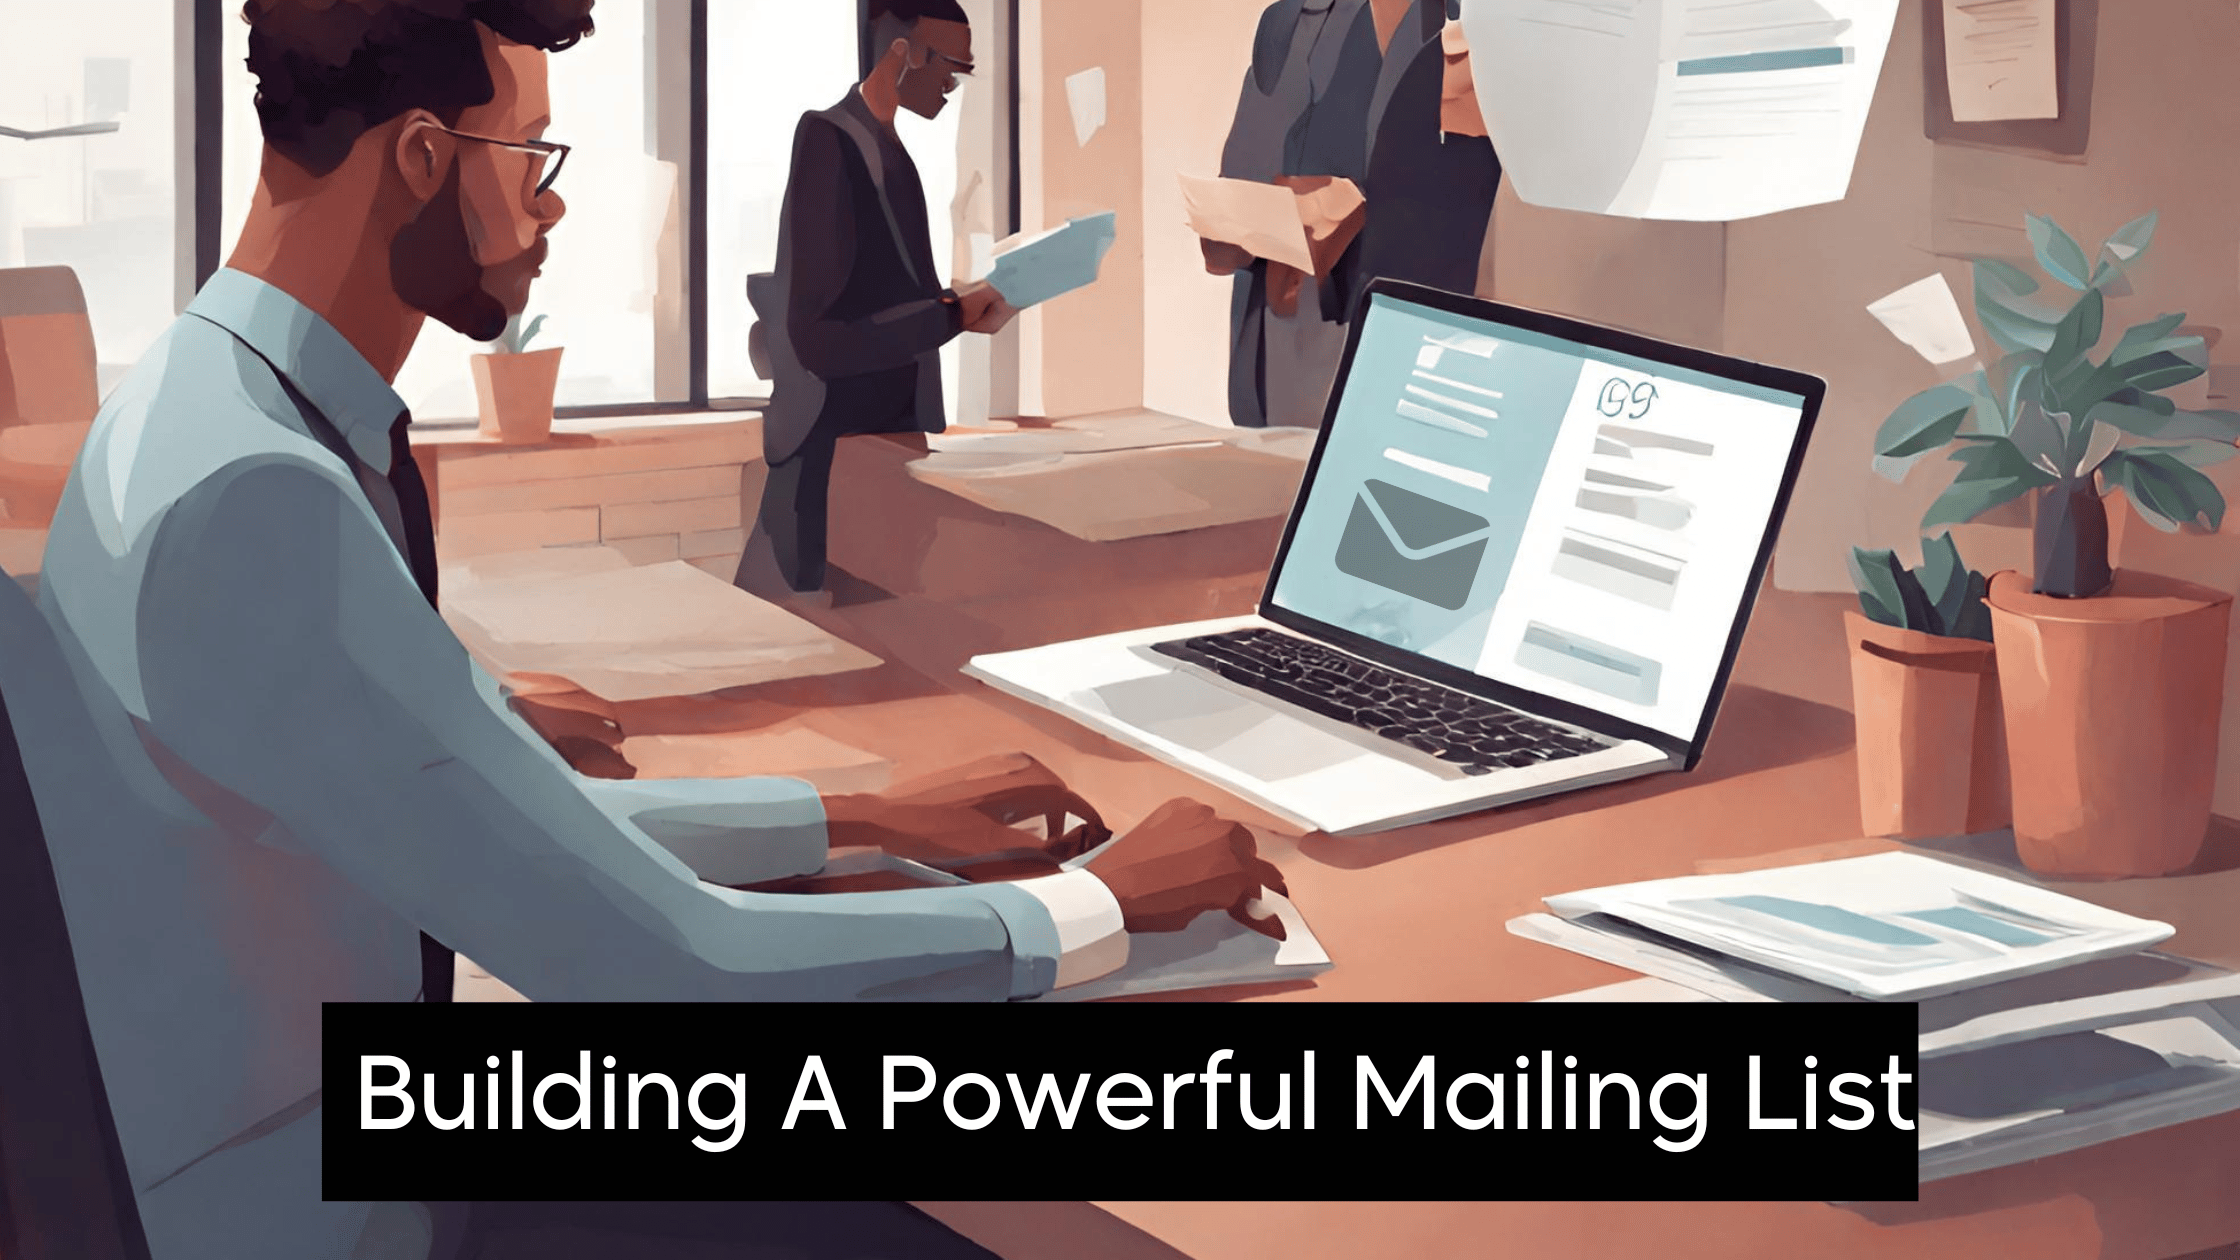 Mastering Email Marketing: 10 Steps To Building A Powerful Mailing List